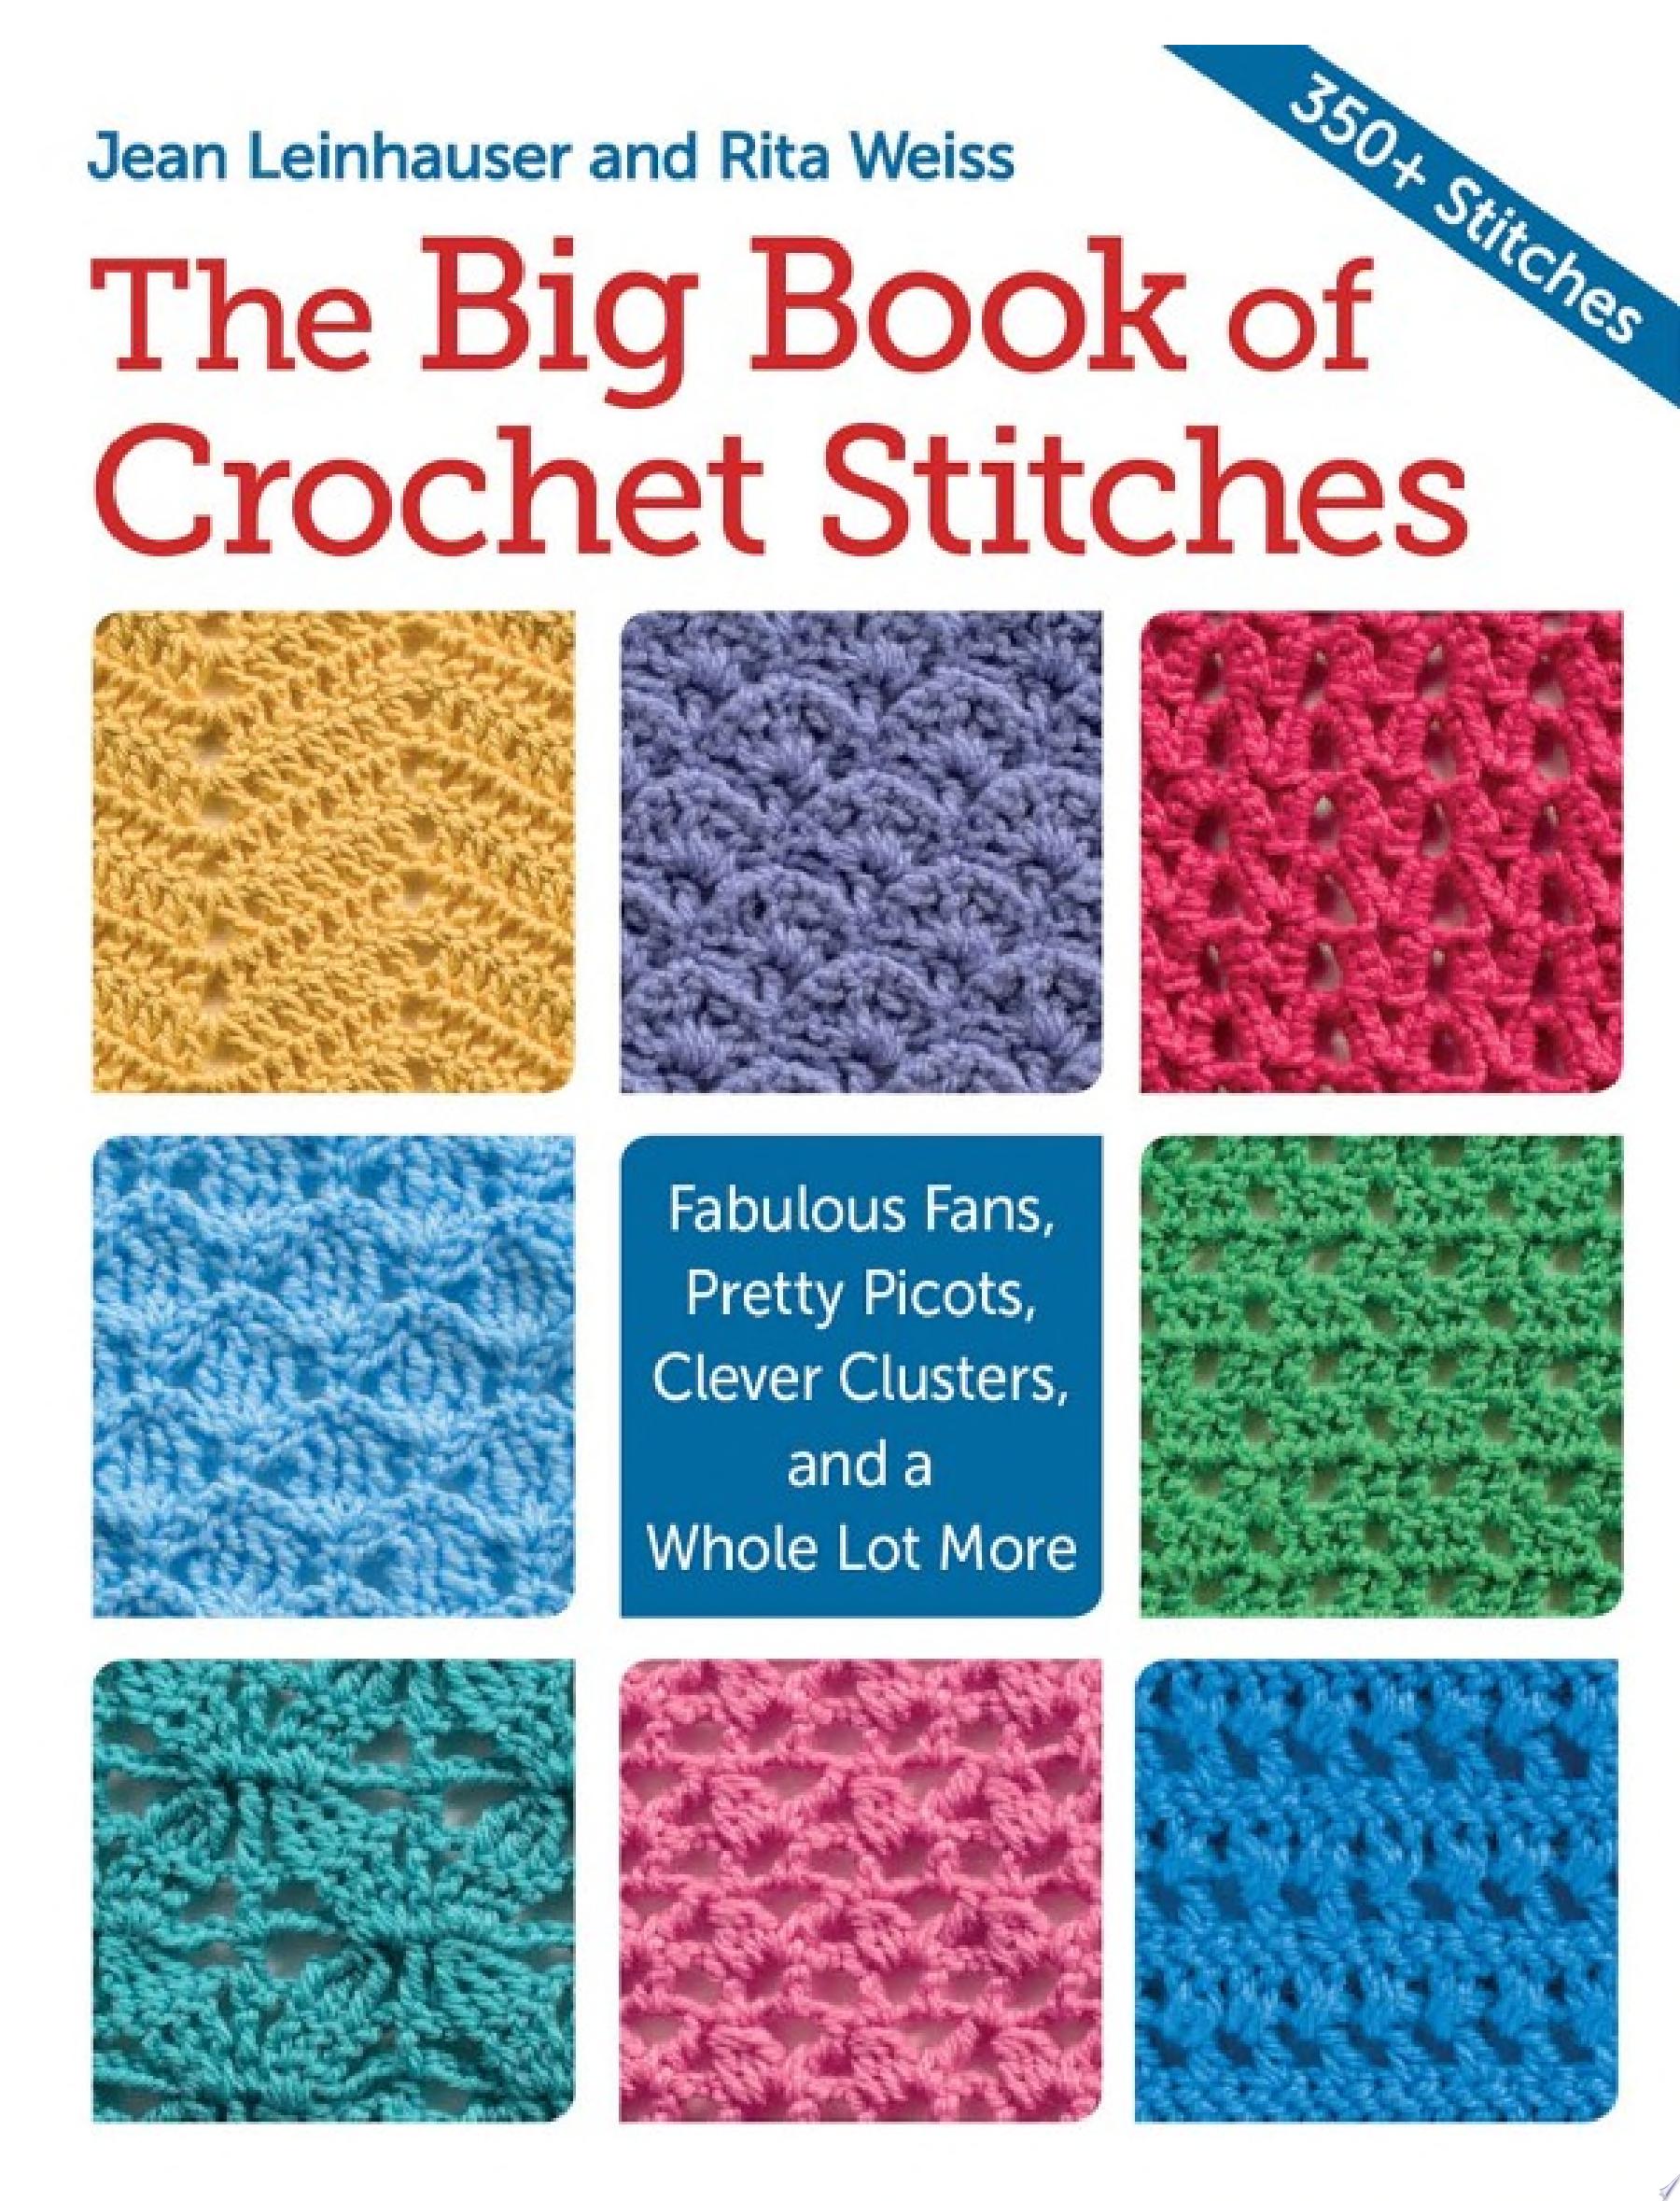 Image for "The Big Book of Crochet Stitches"